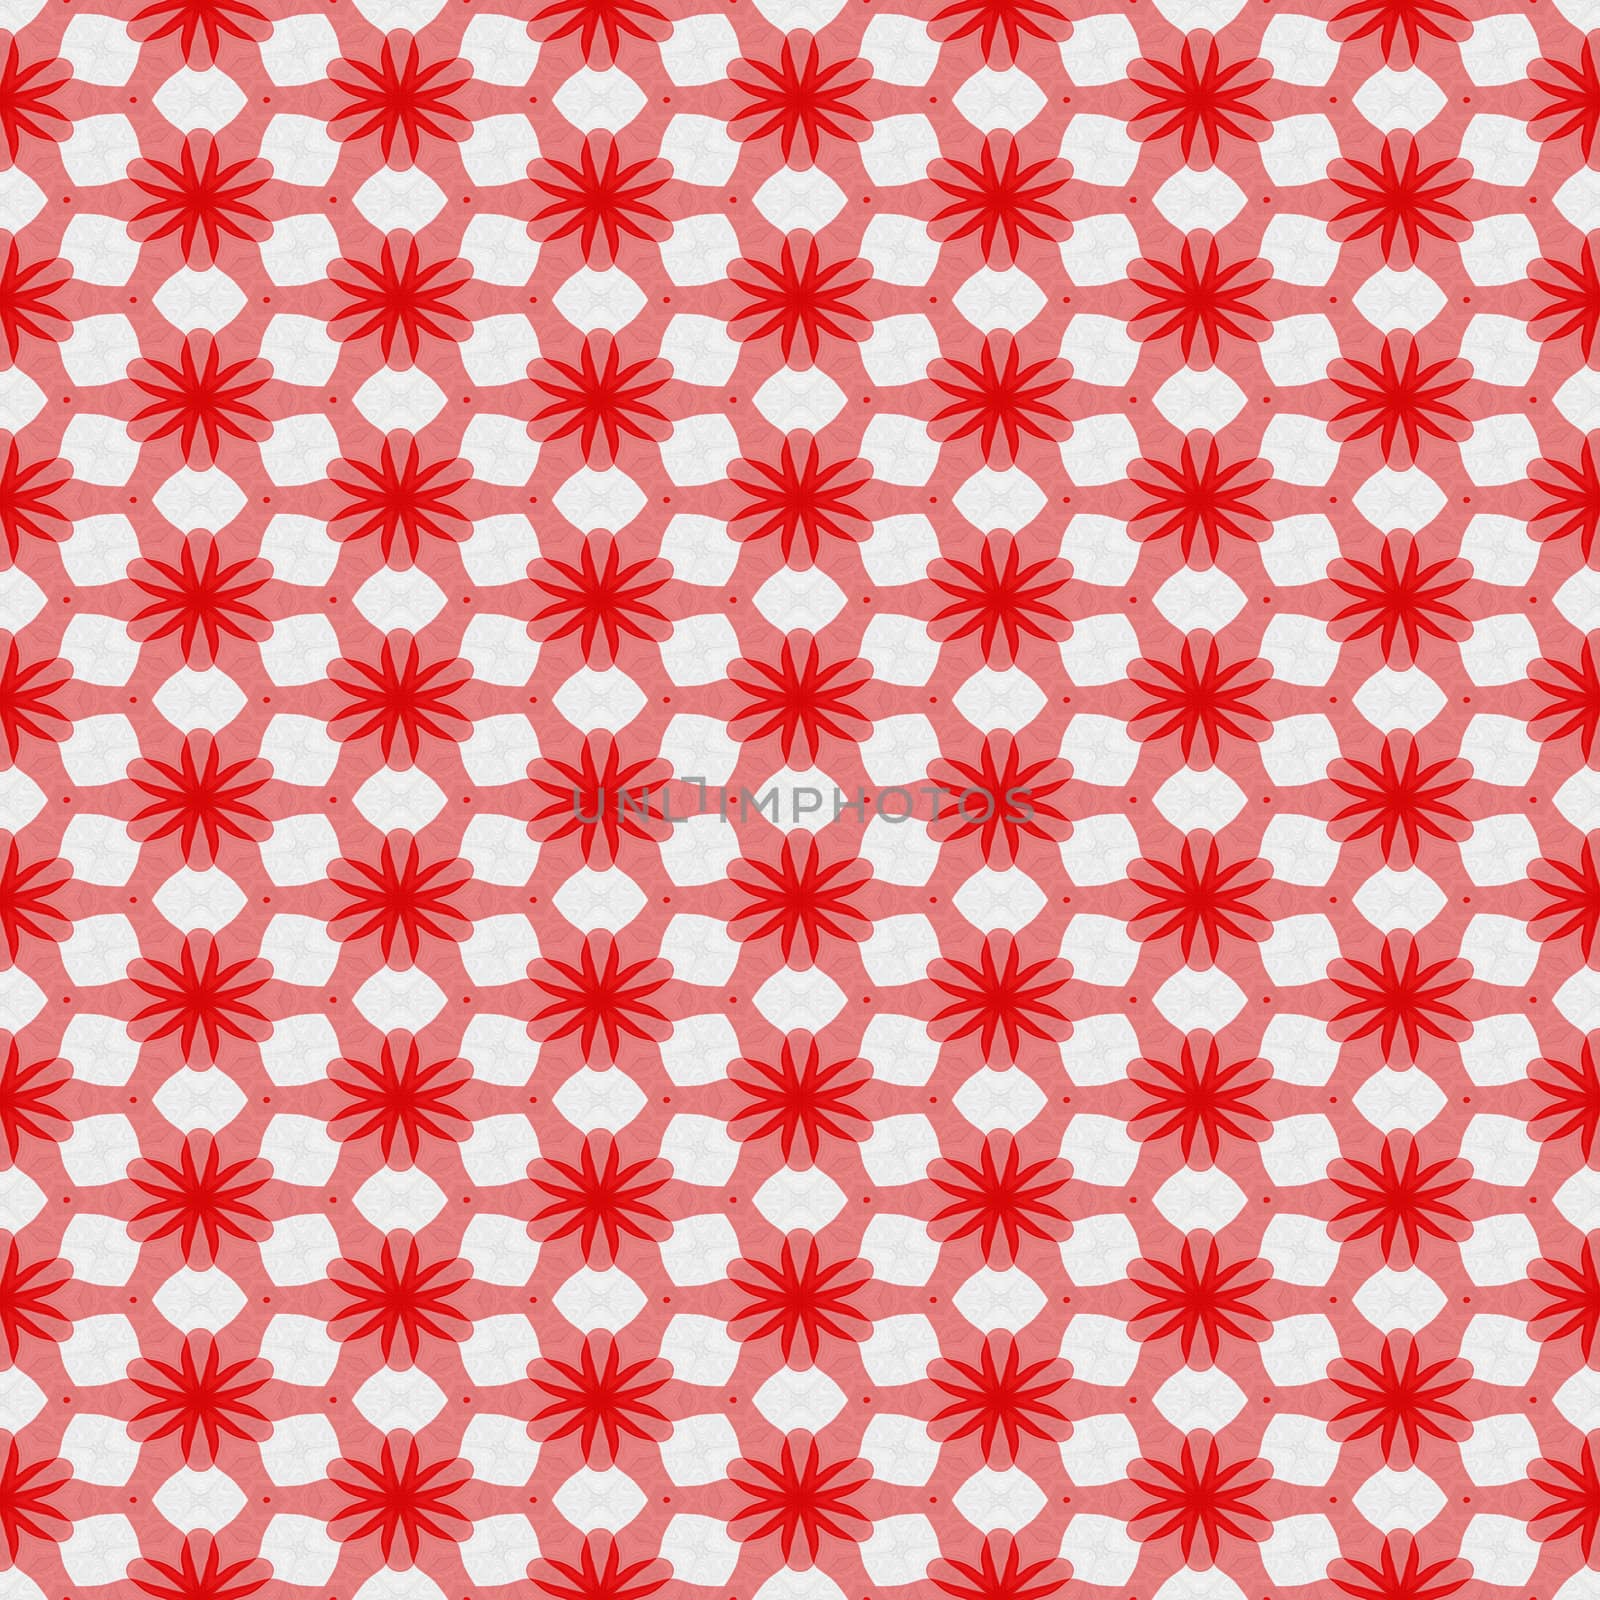 seamless fabric texture with red star shapes and white dots on pink